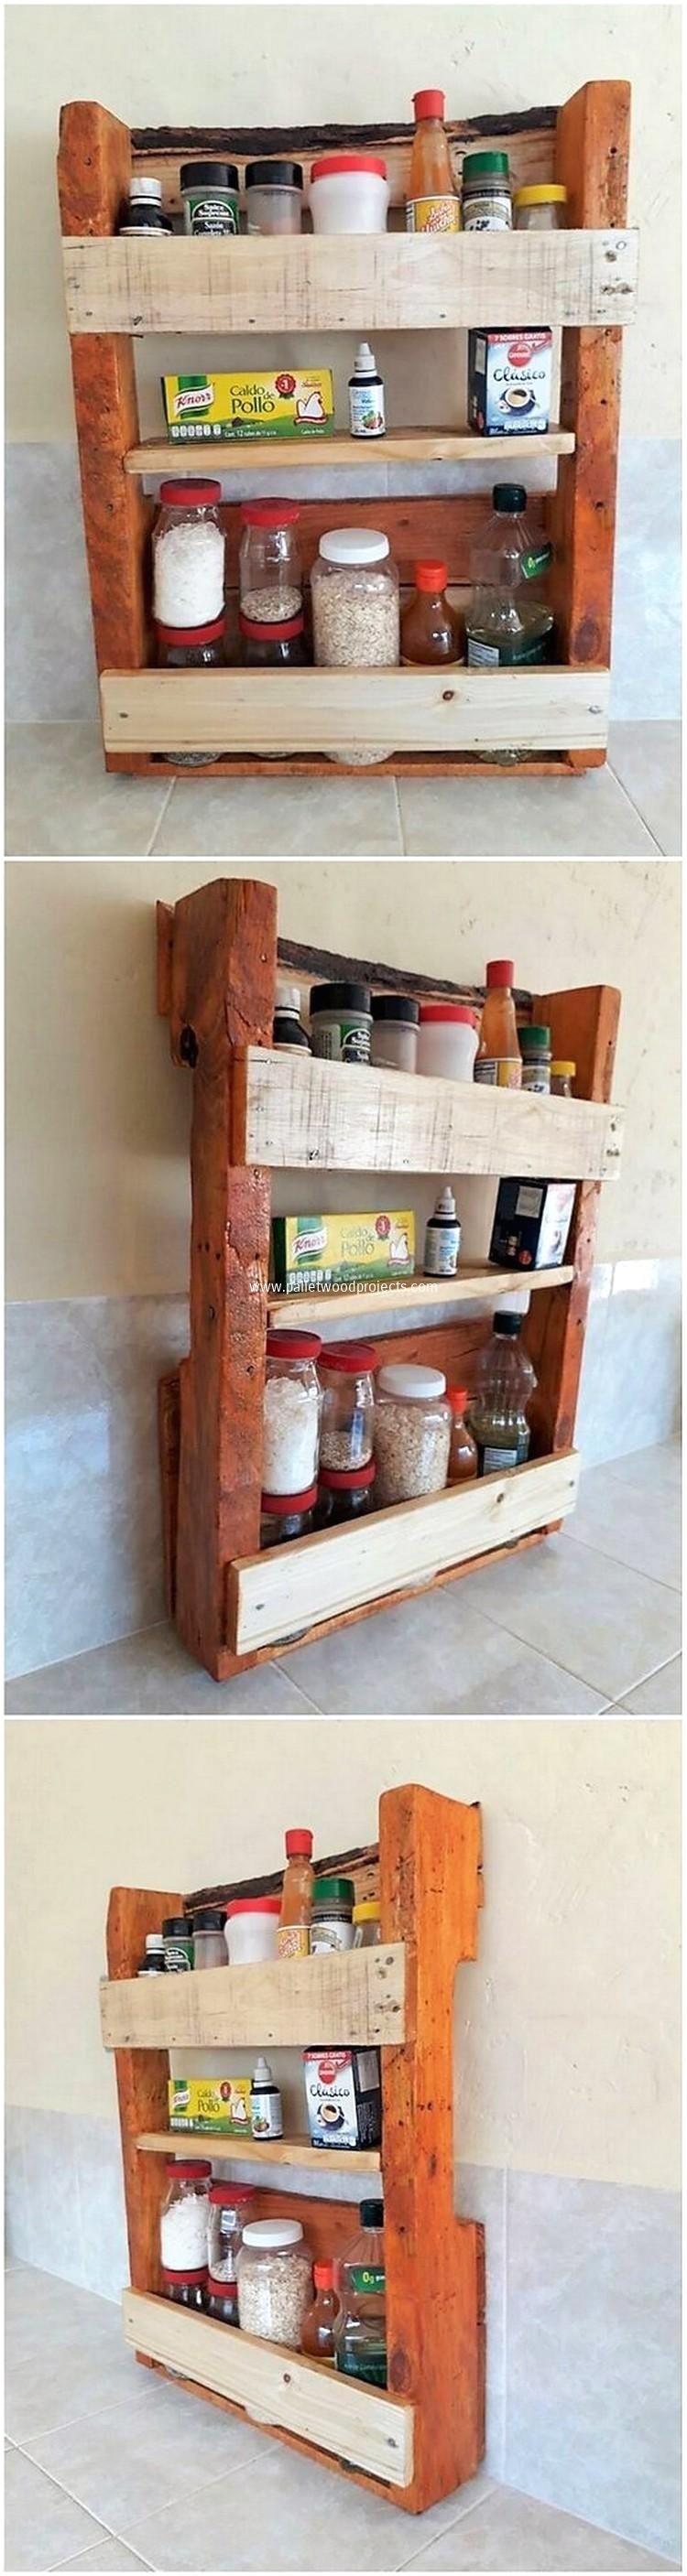 creative plans for wood pallets upcycling this image is showing you out the kitchen spice rack